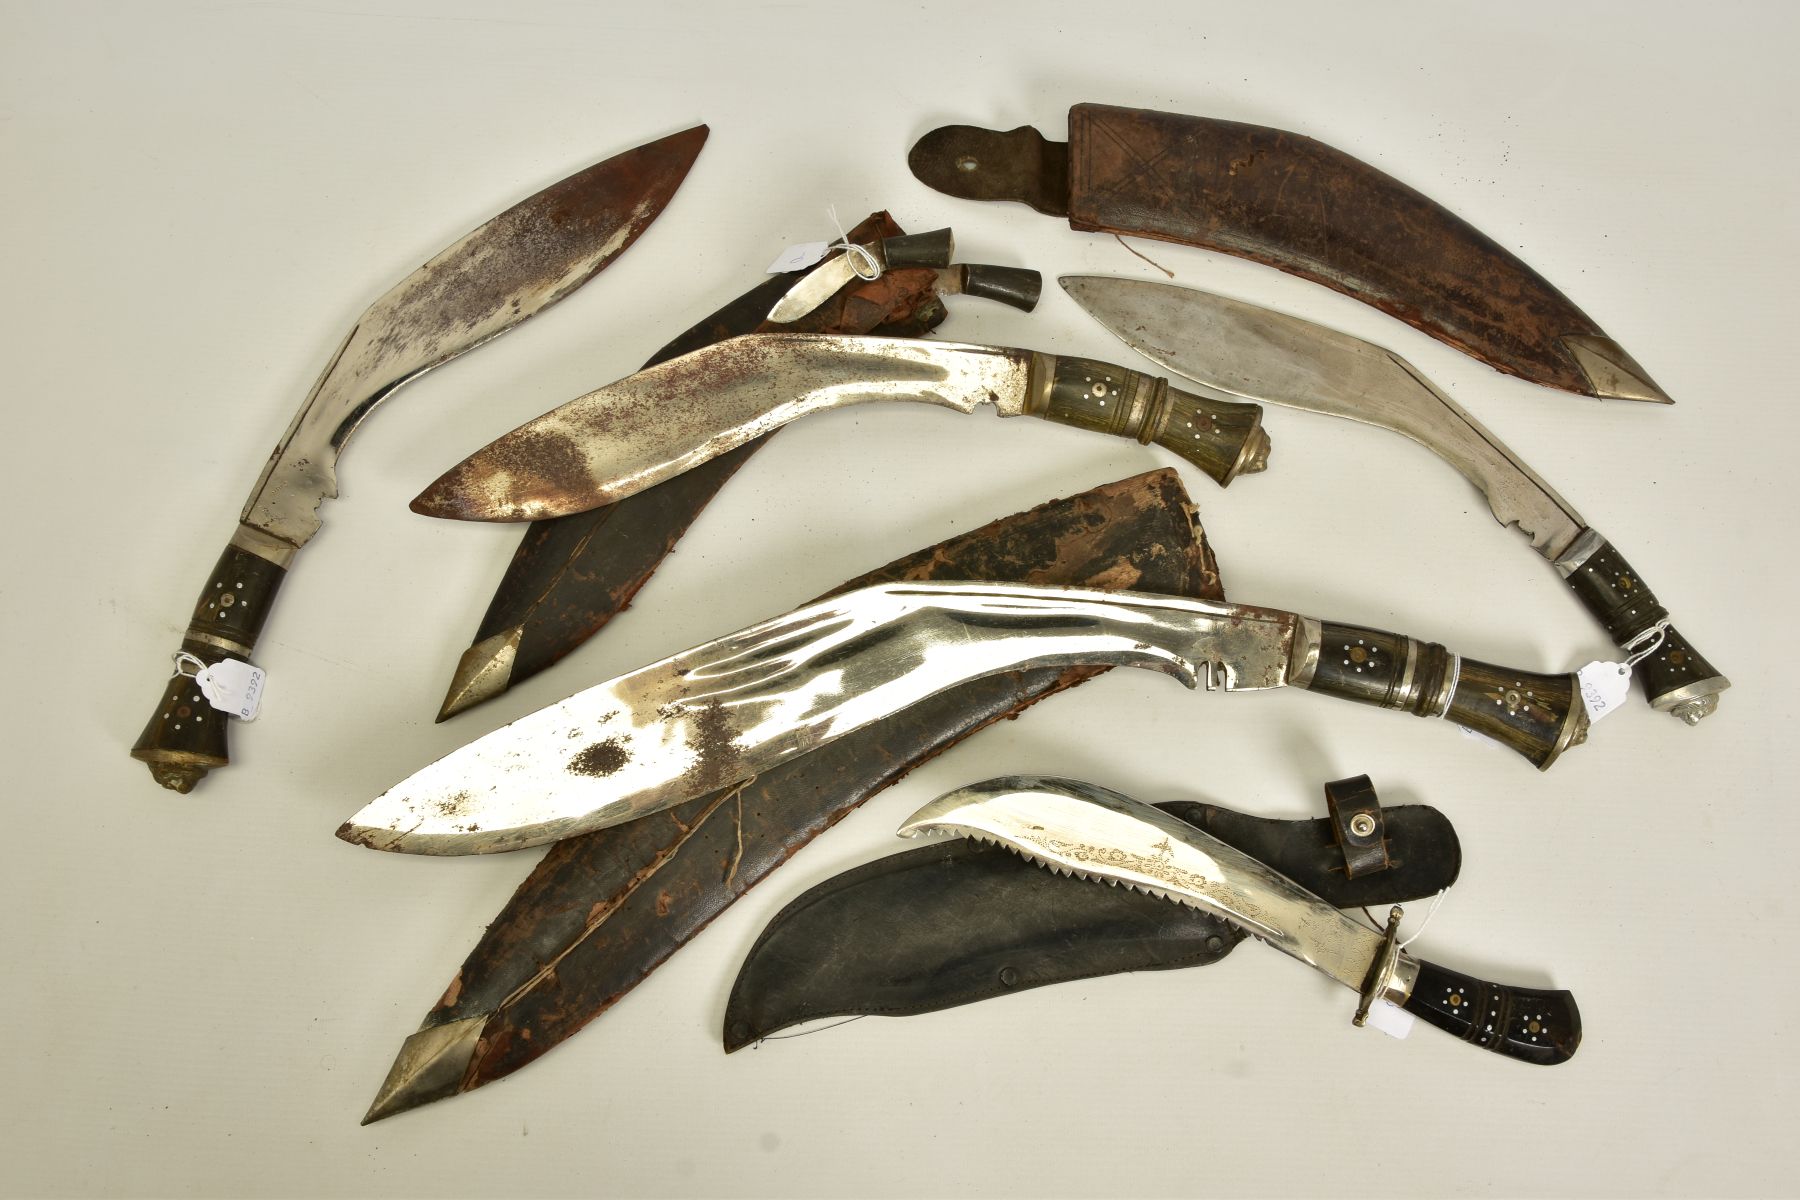 FIVE x EXAMPLES OF INDIAN/ASIAN SUB CONTINENT KUKURI STYLE KNIVES/DAGGERS, FOUR have scabbards